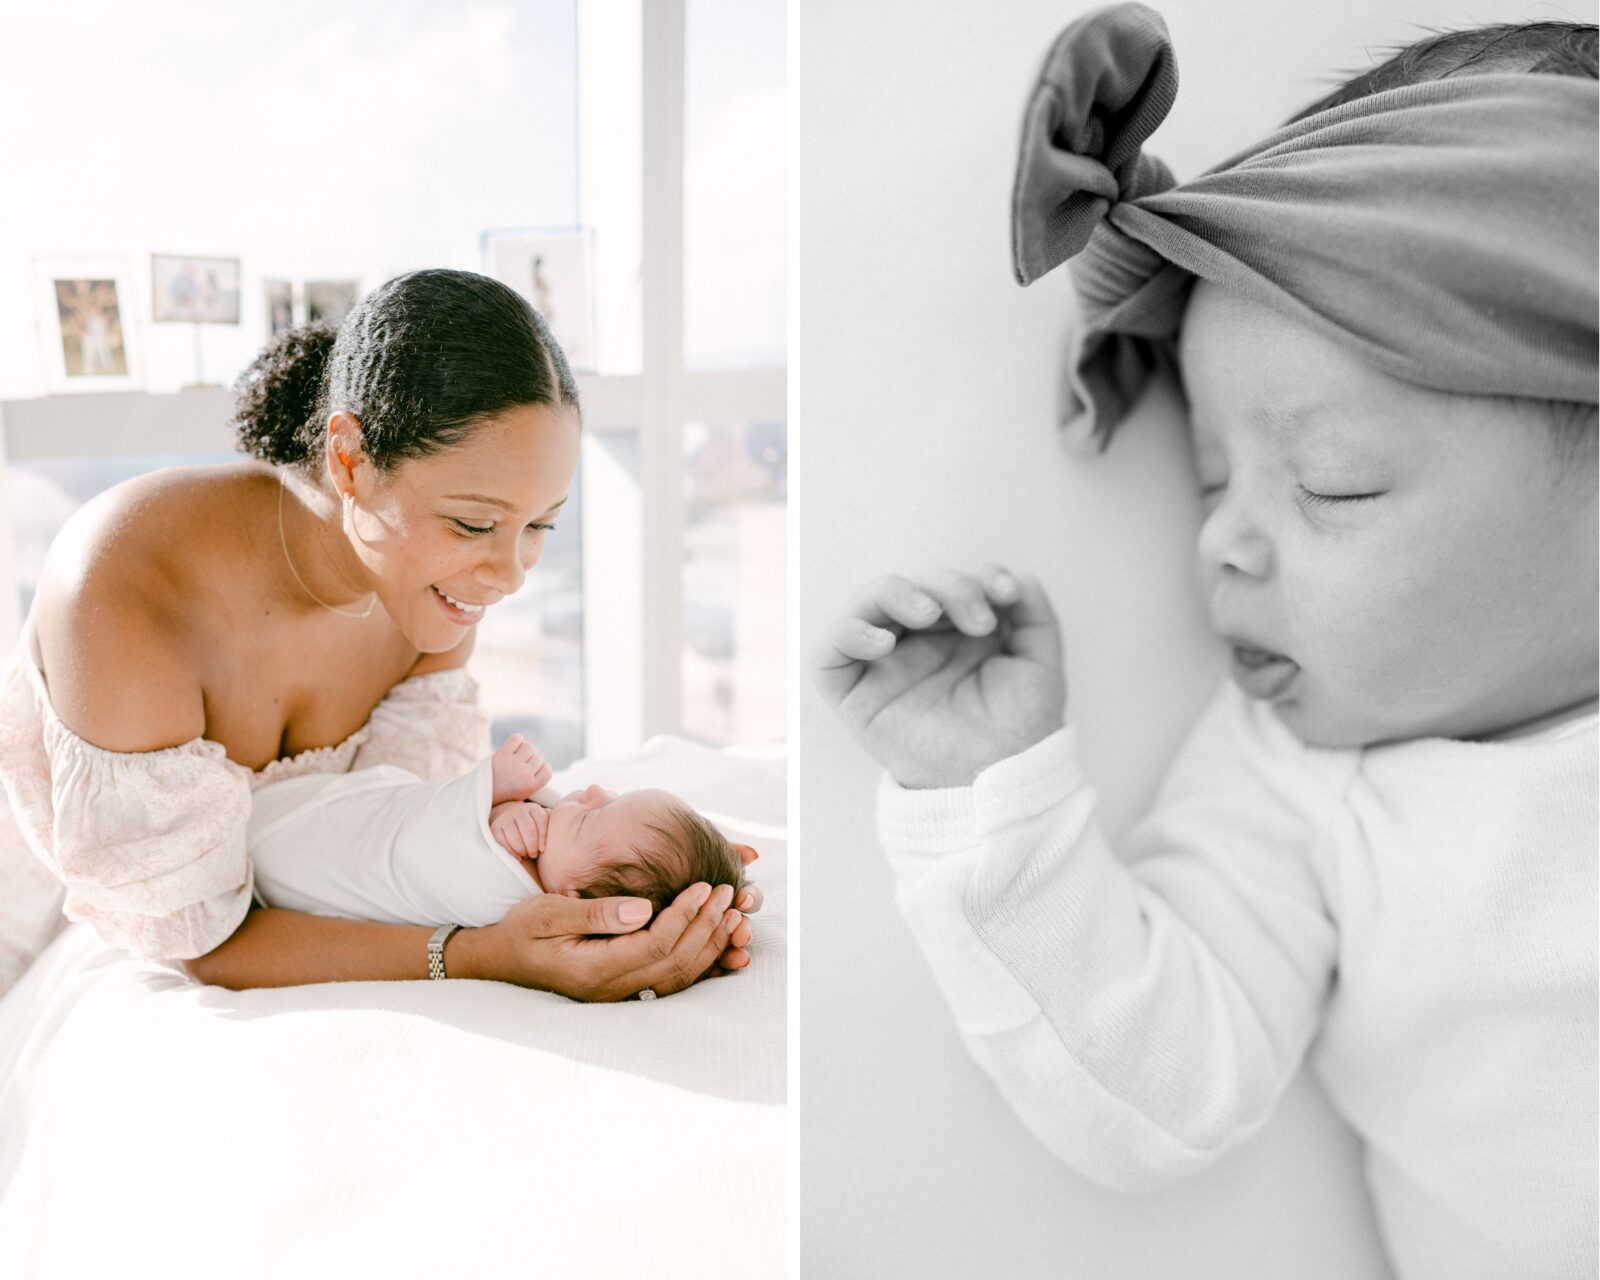 Mom is happy looking at her baby girl during her Luxury Miami Newborn Photoshoot